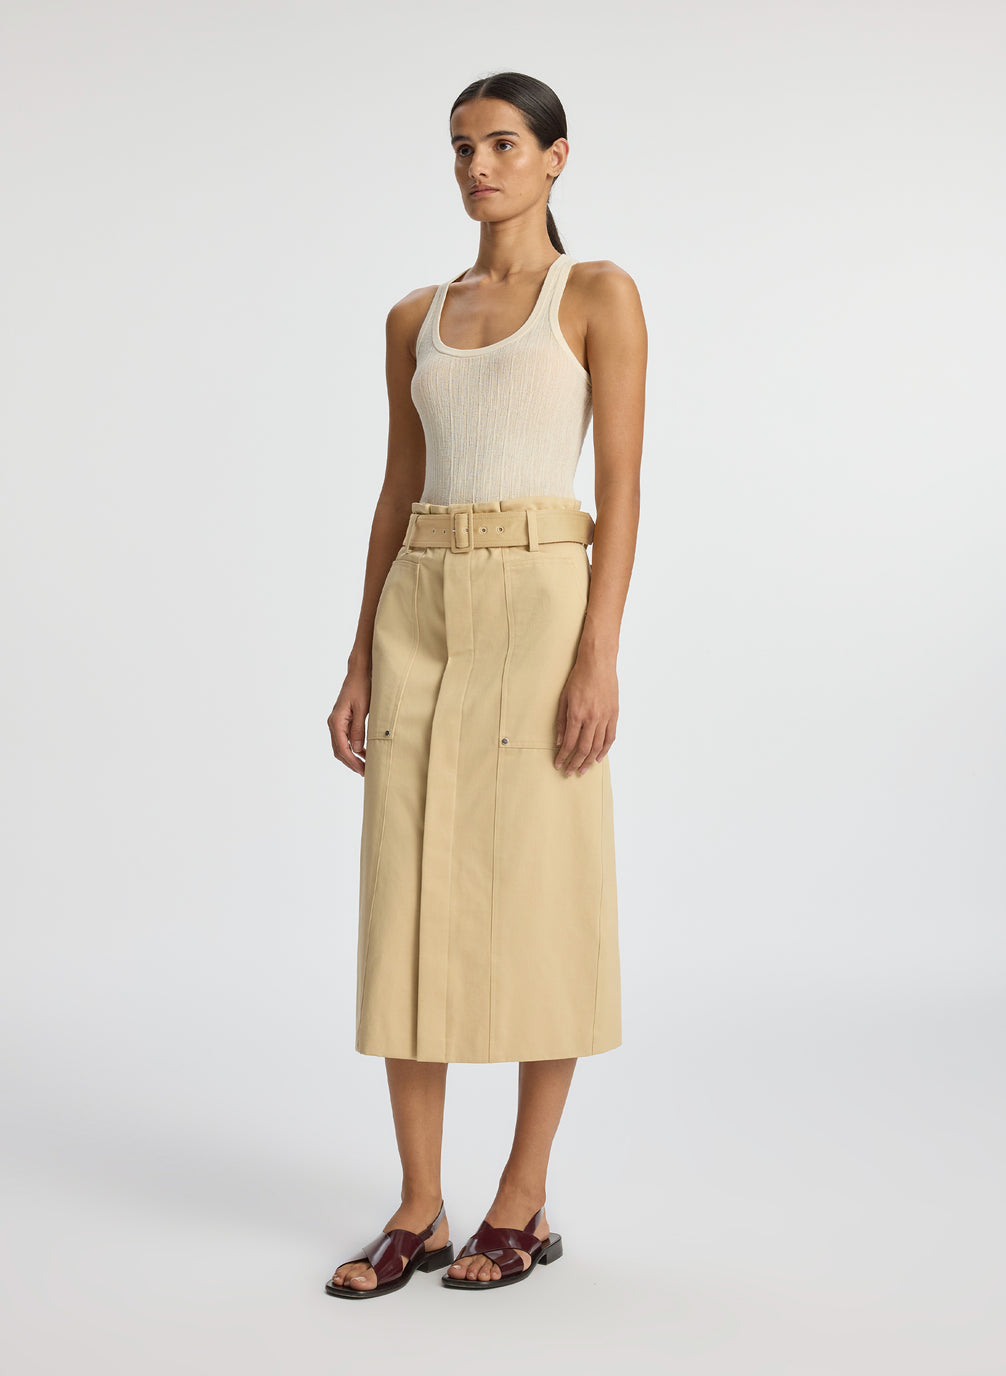 side view of woman wearing beige tank top and tan midi skirt